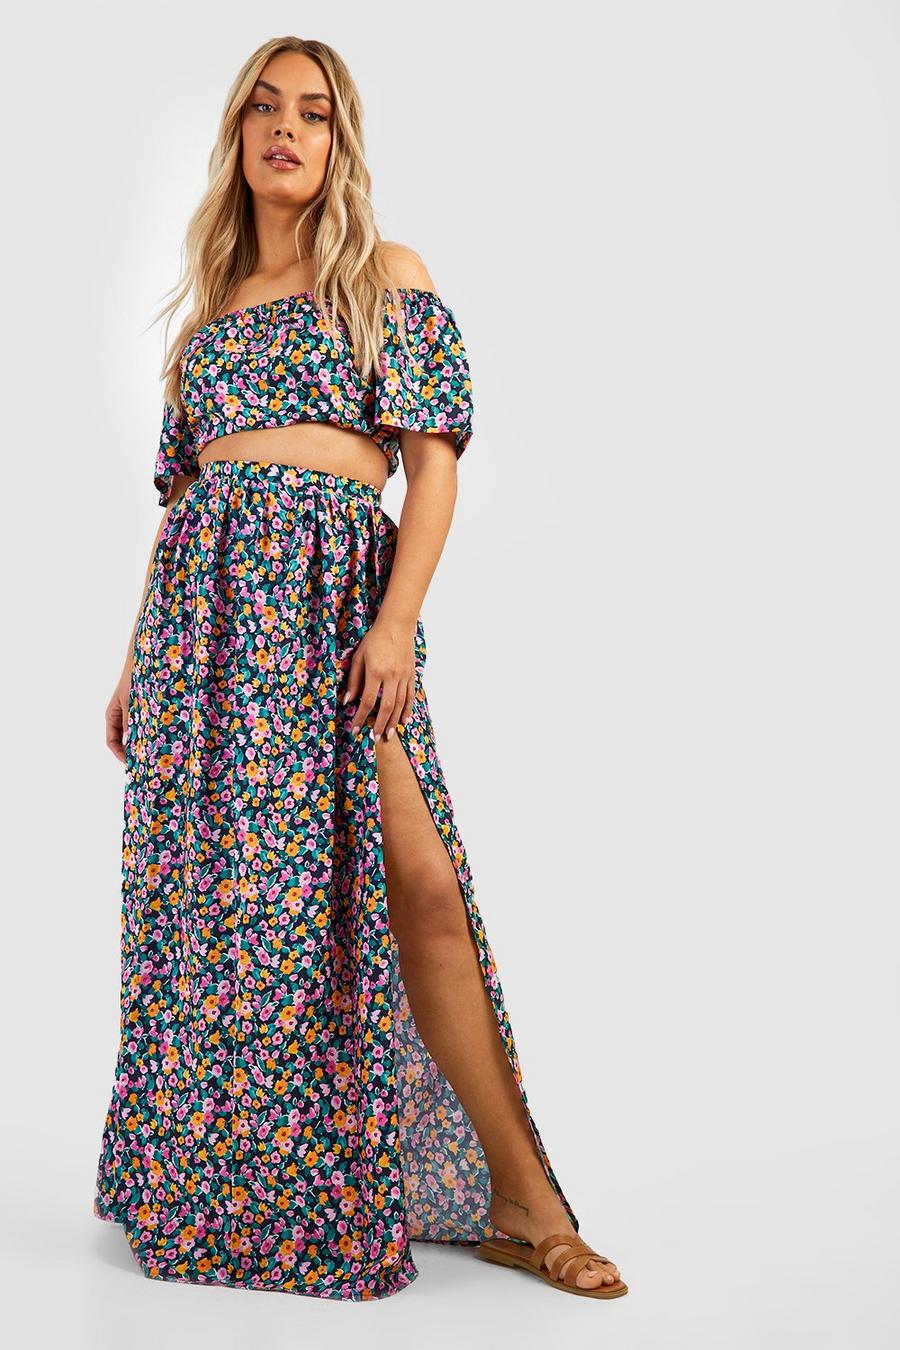 Black Plus Floral Off The Shoulder And Skirt Two-Piece